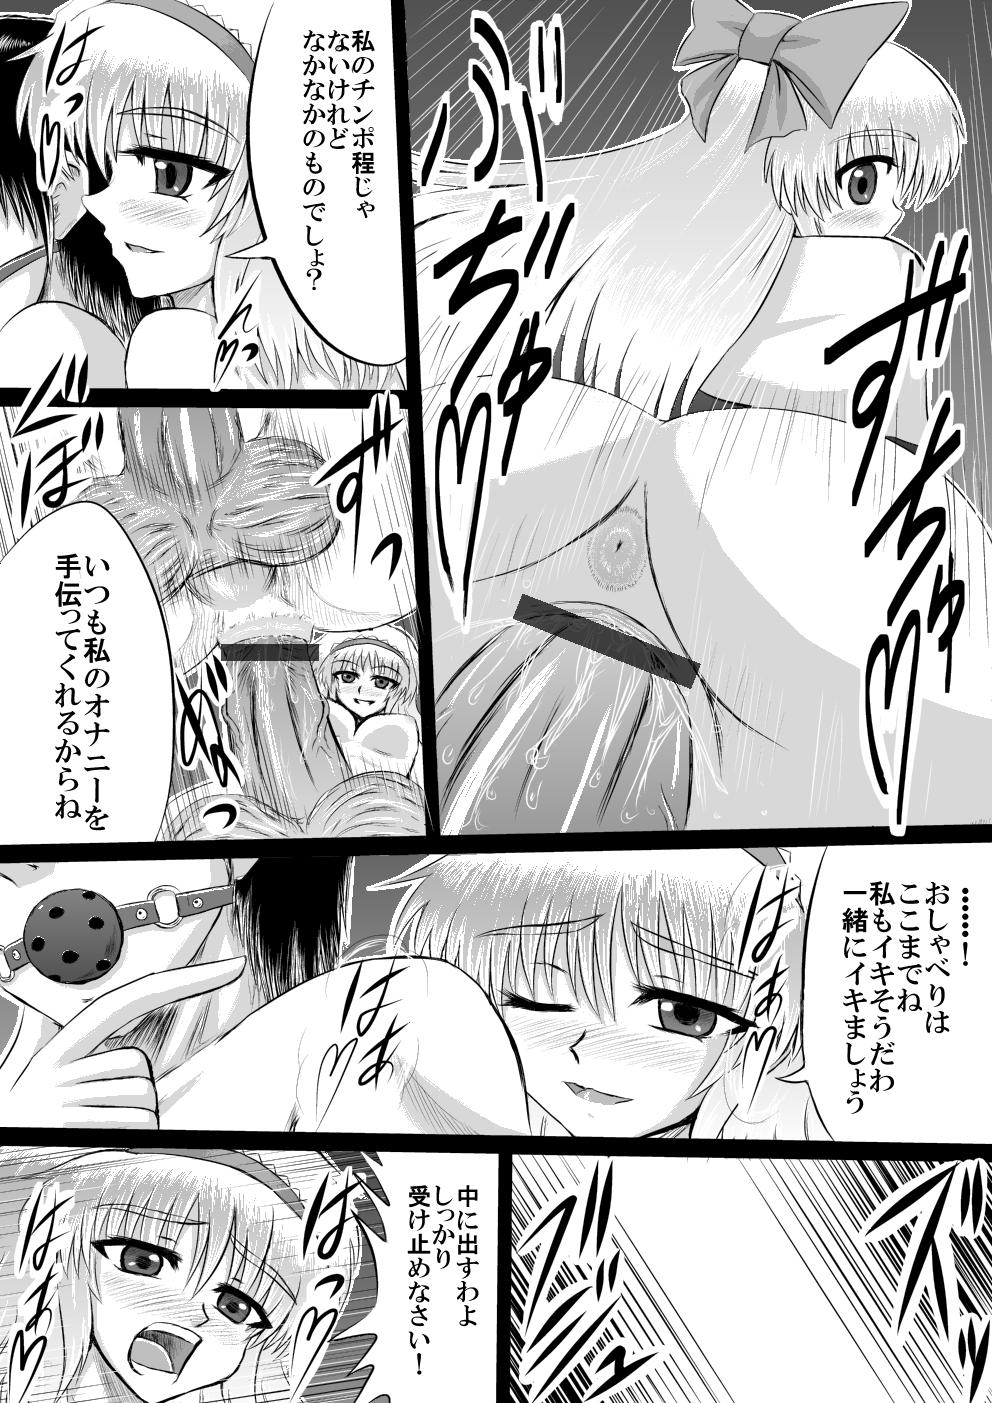 Bath 大魔女アリス＝マーガトロイドの専属オナホ - Touhou project Gay Blondhair - Page 8